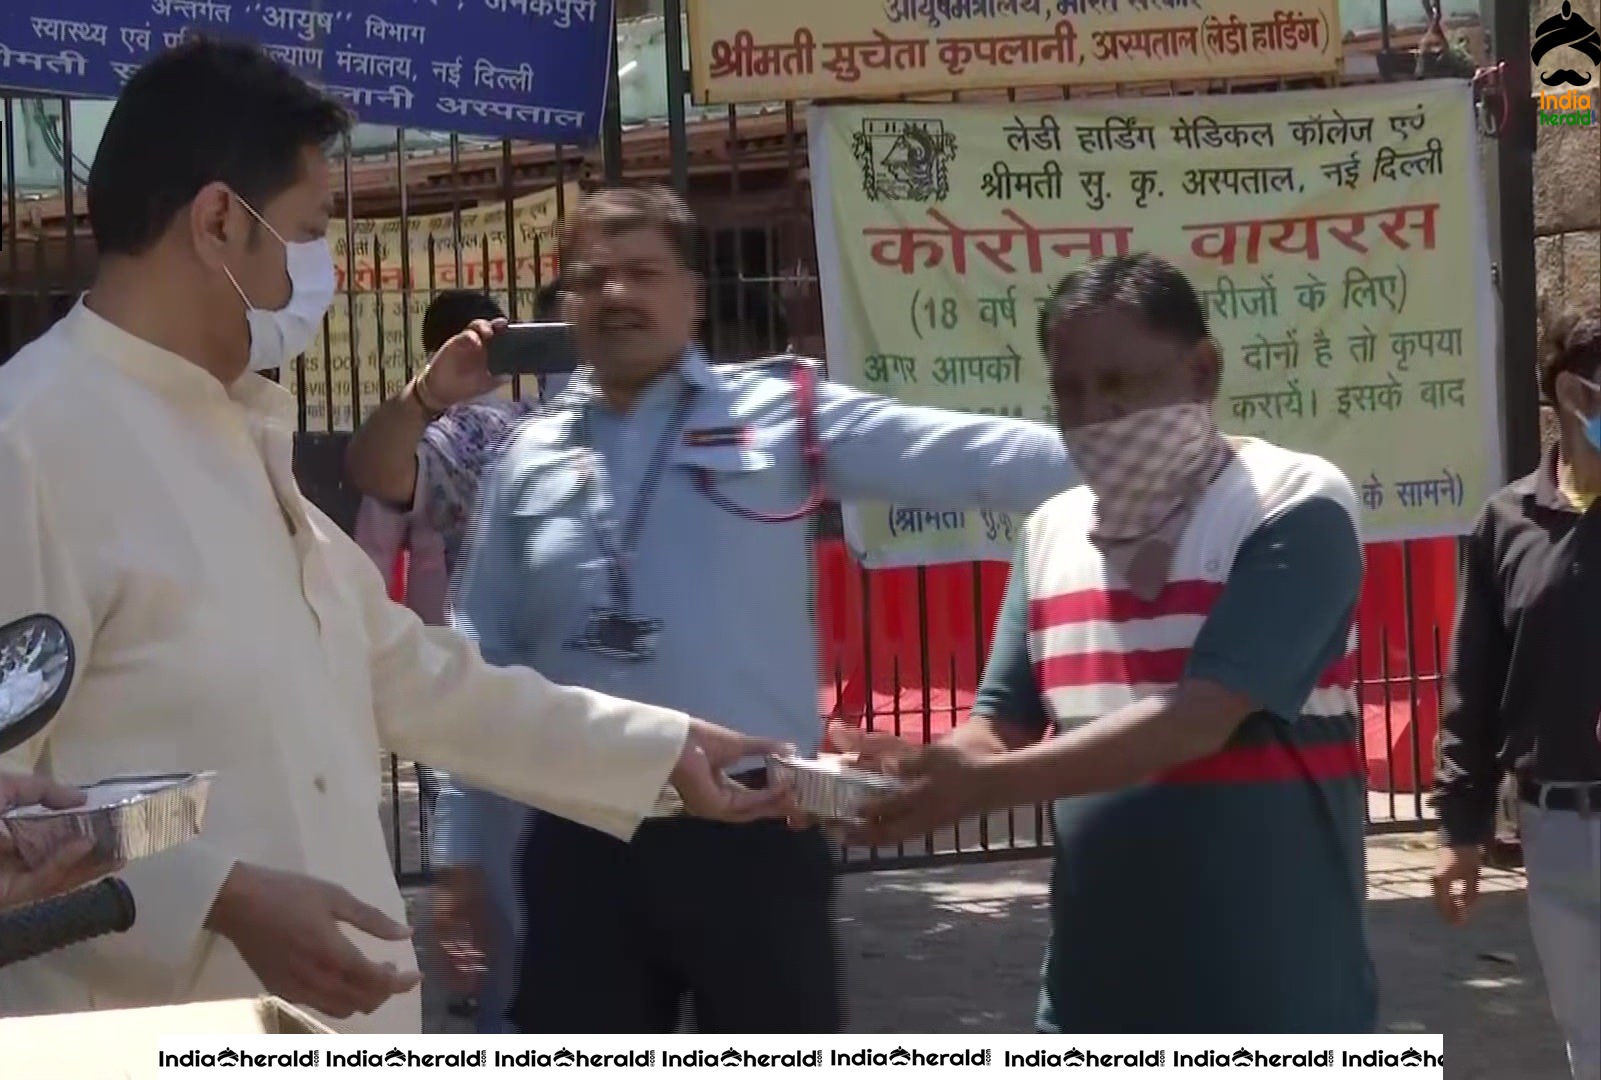 Congress workers distributed food packets among the needy people in Delhi due to Corona Virus Lockdown